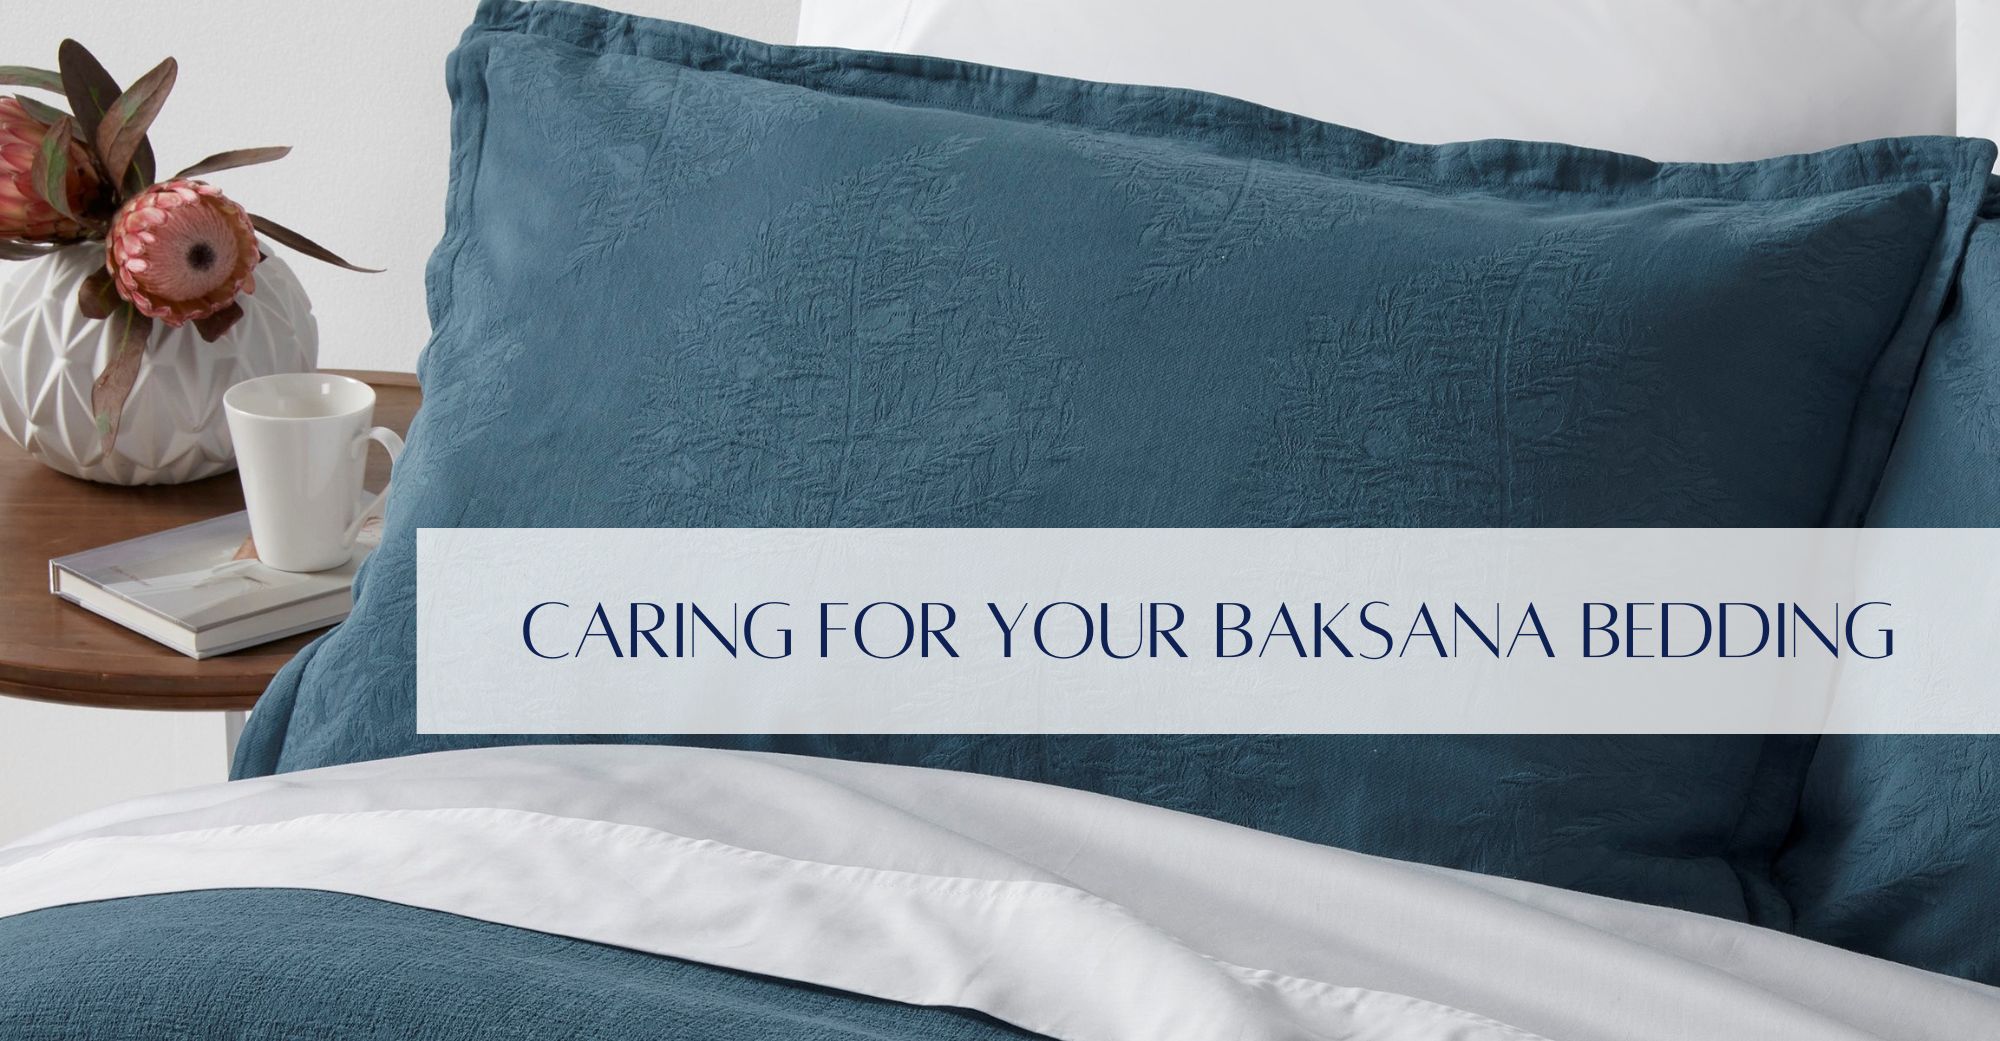 Caring for Your Baksana Bedding